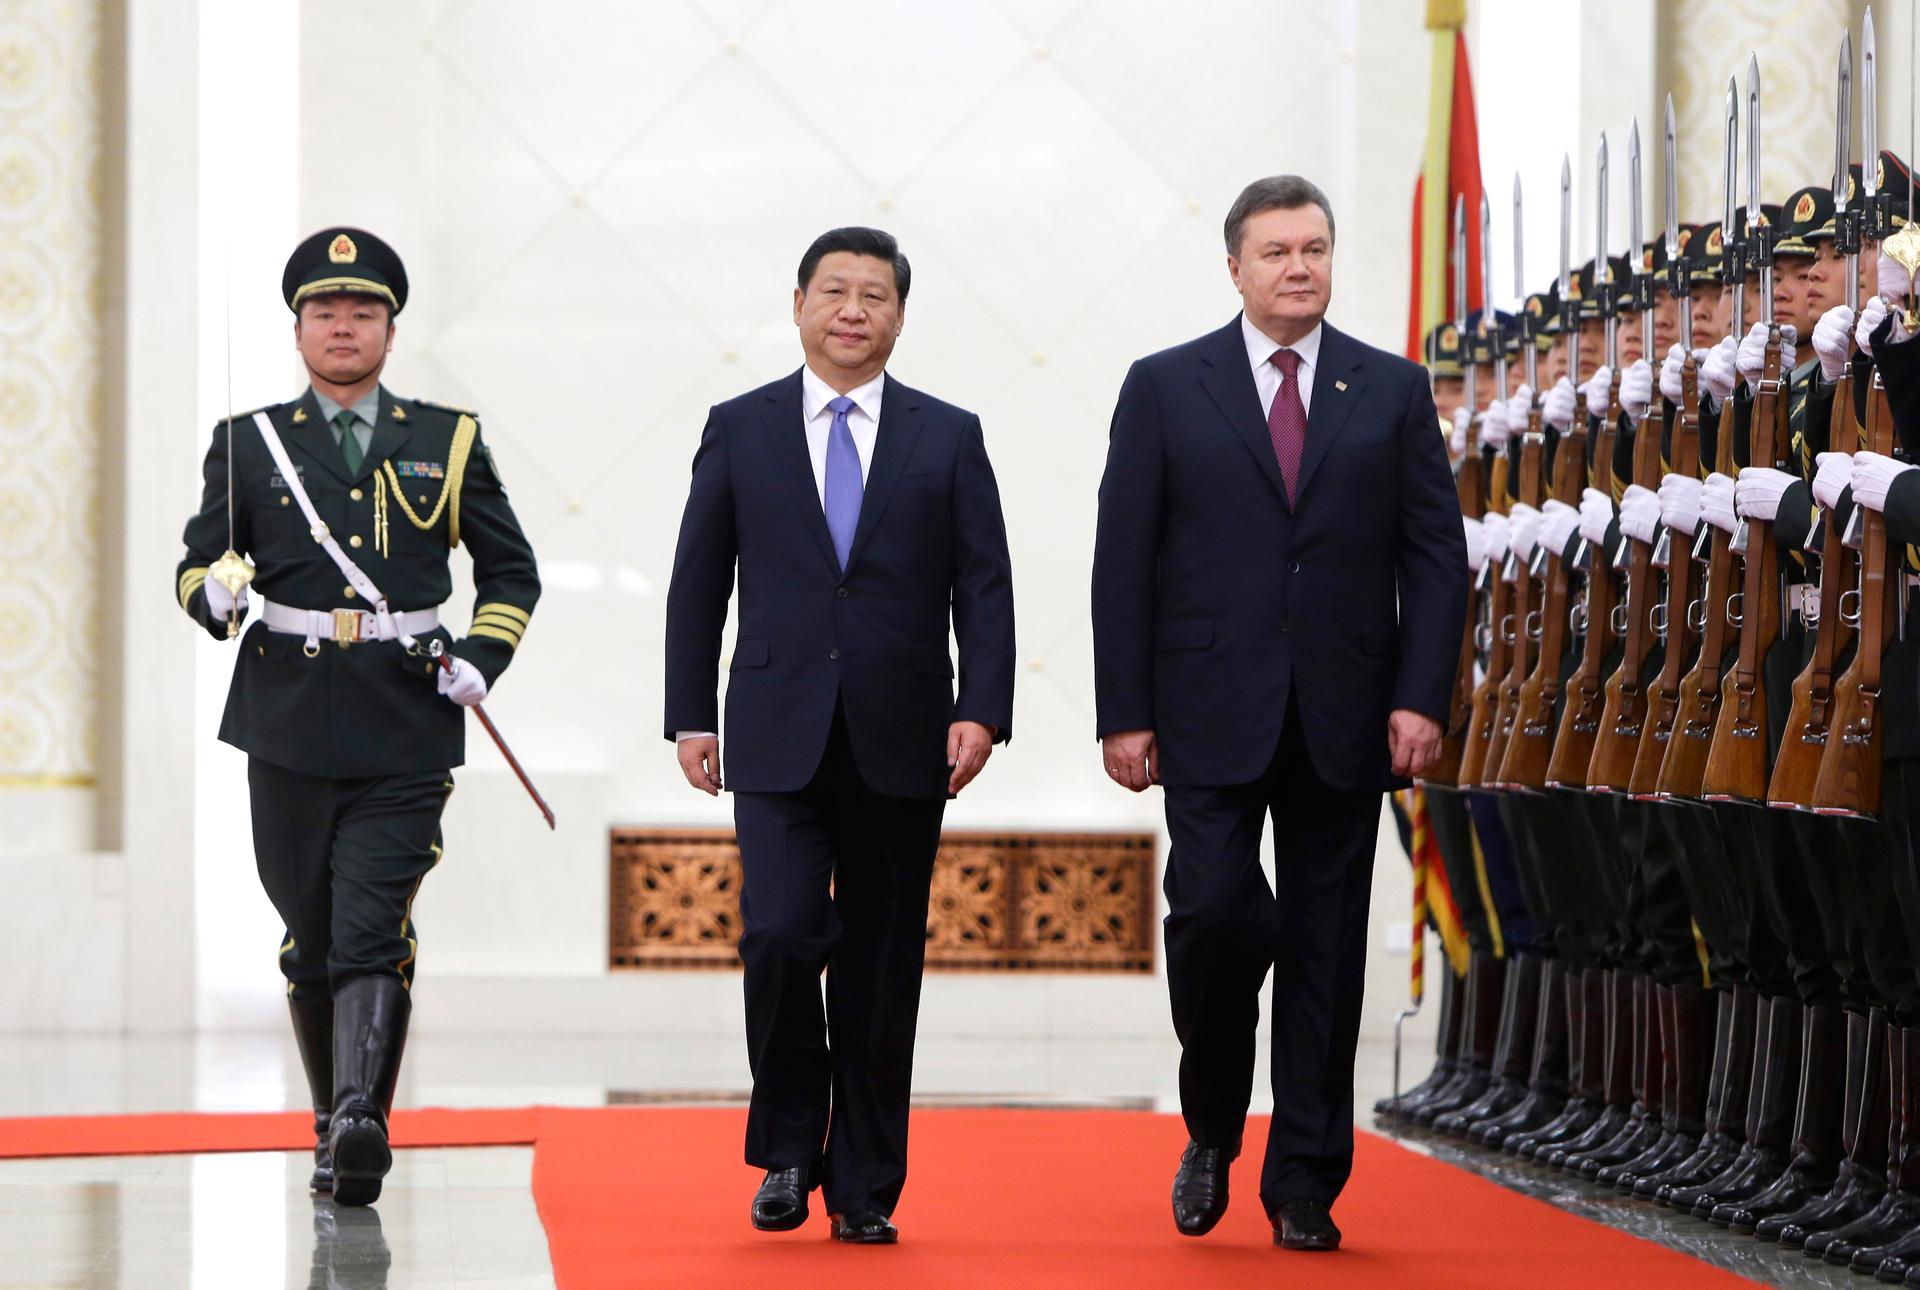 China's President Xi Jinping hosted his Ukrainian counterpart Viktor Yanukovich at the Great Hall of the People in Beijing, back in December 2013.  